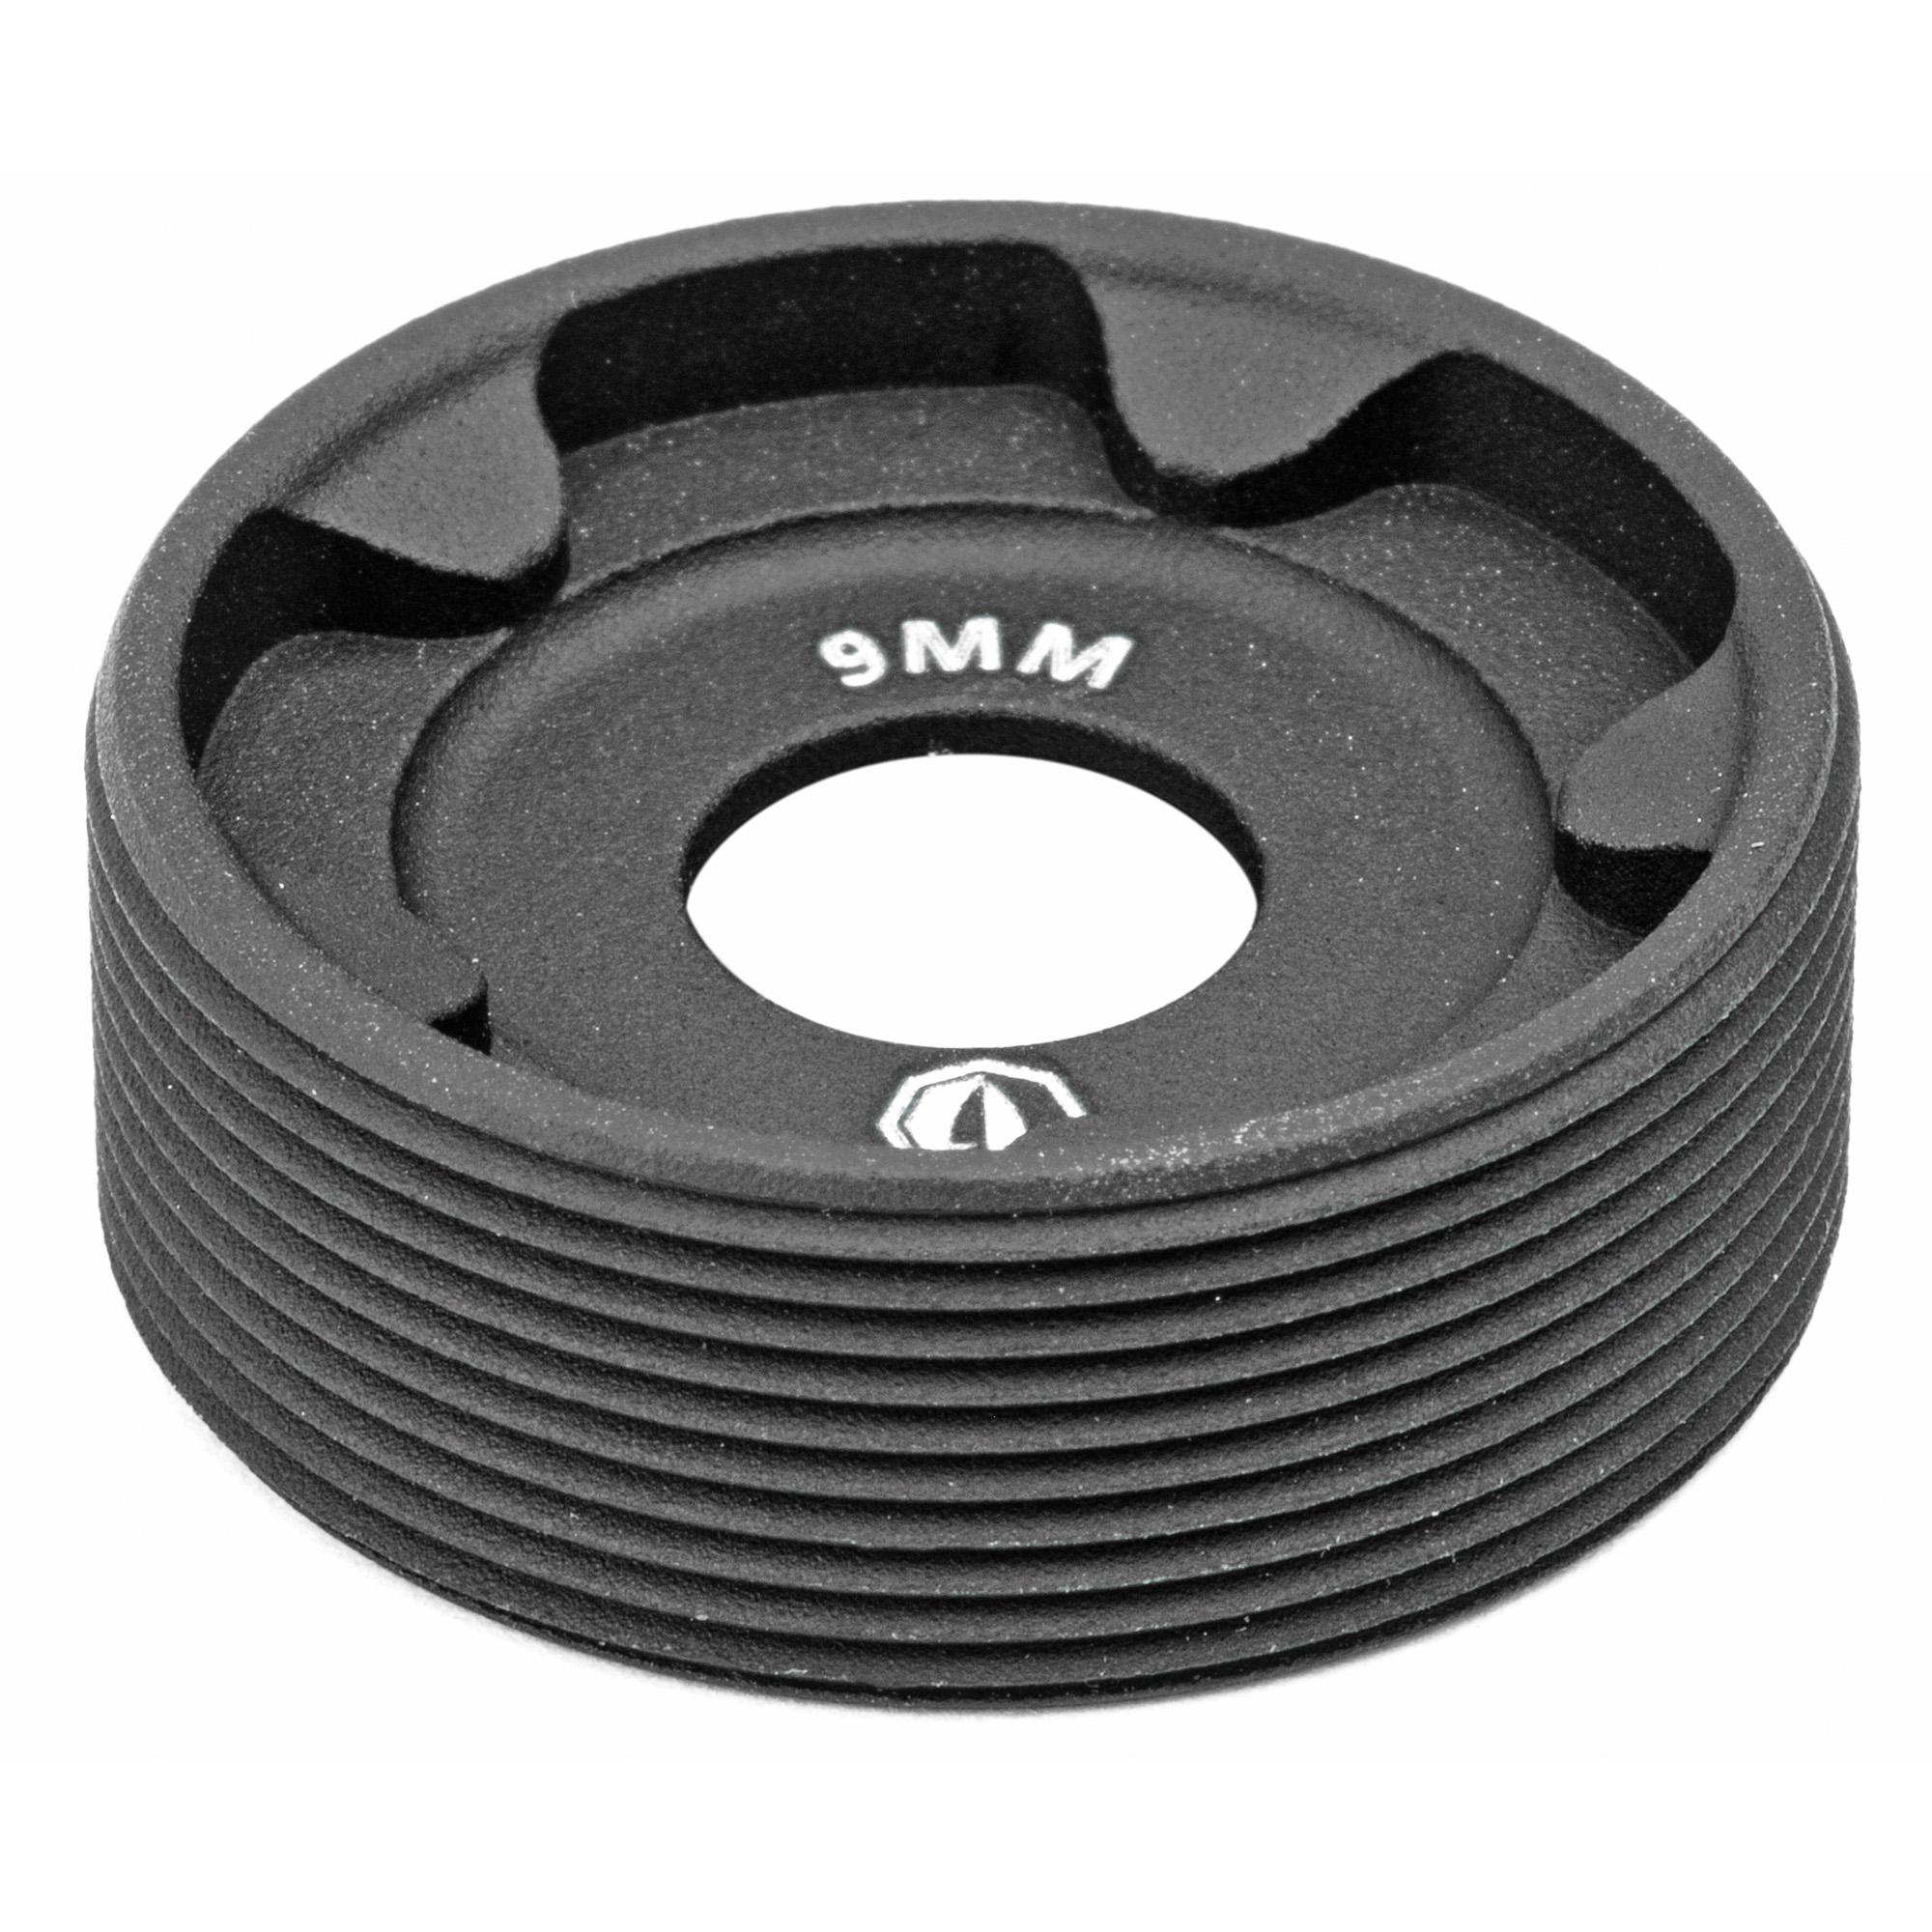 Rugged Front Cap 9mm